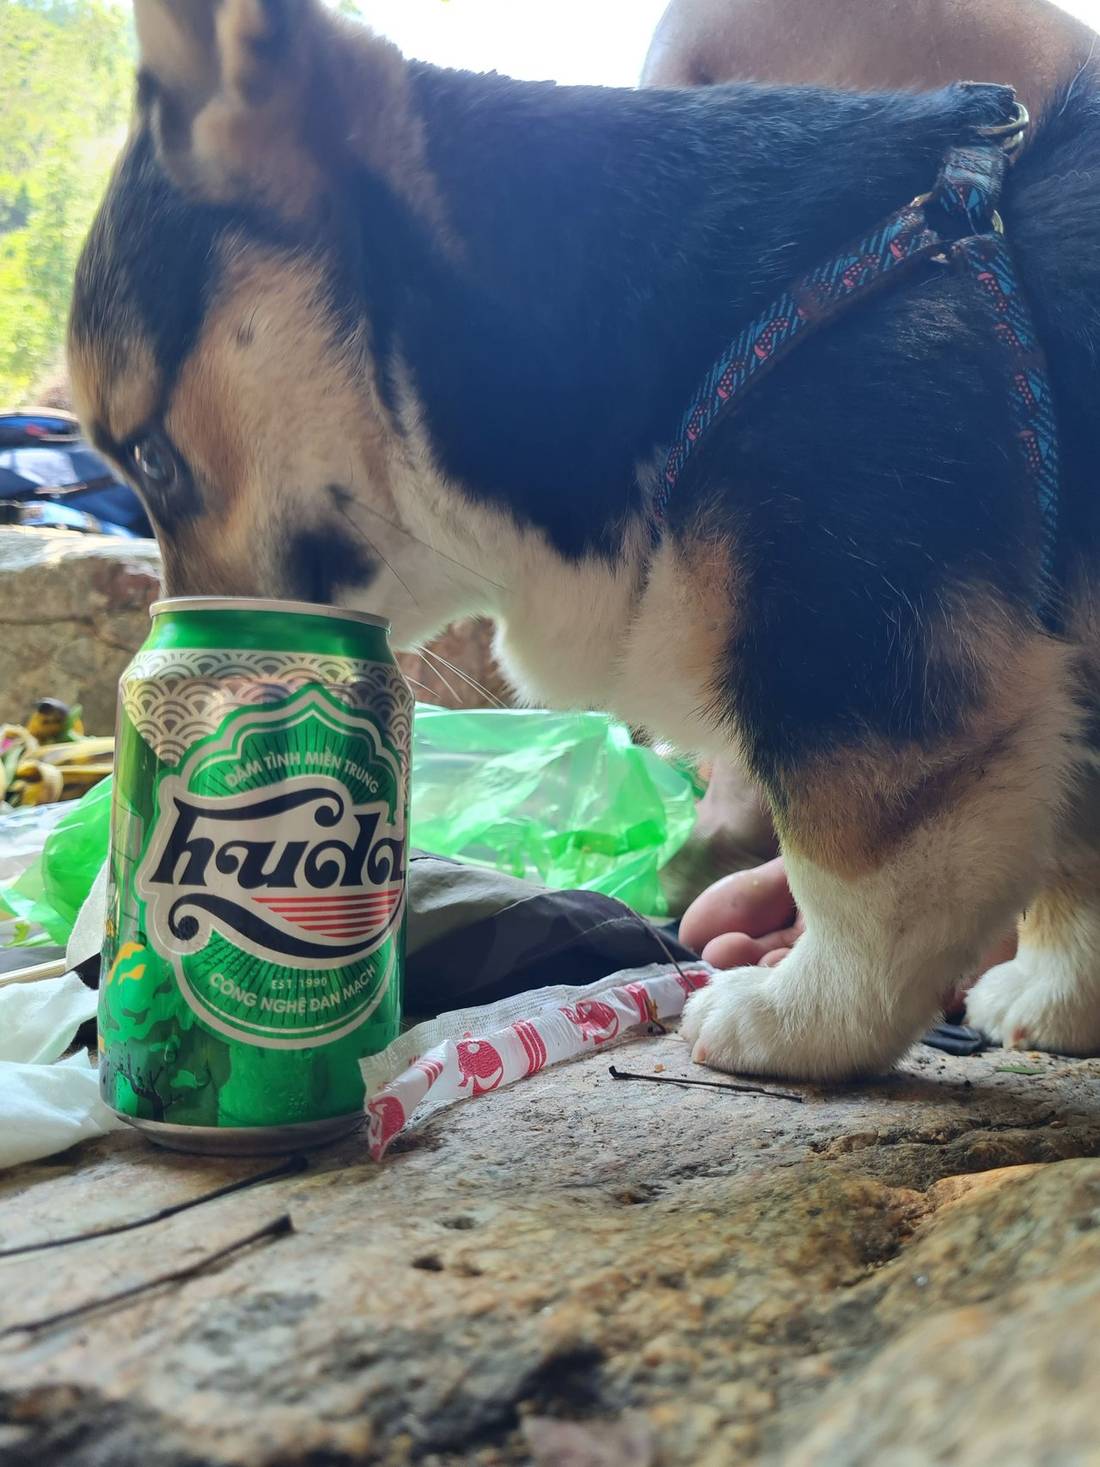 just kidding his nose sniffing food, not drinking beer... it just is a perspective trick that makes it looks like he is drinking